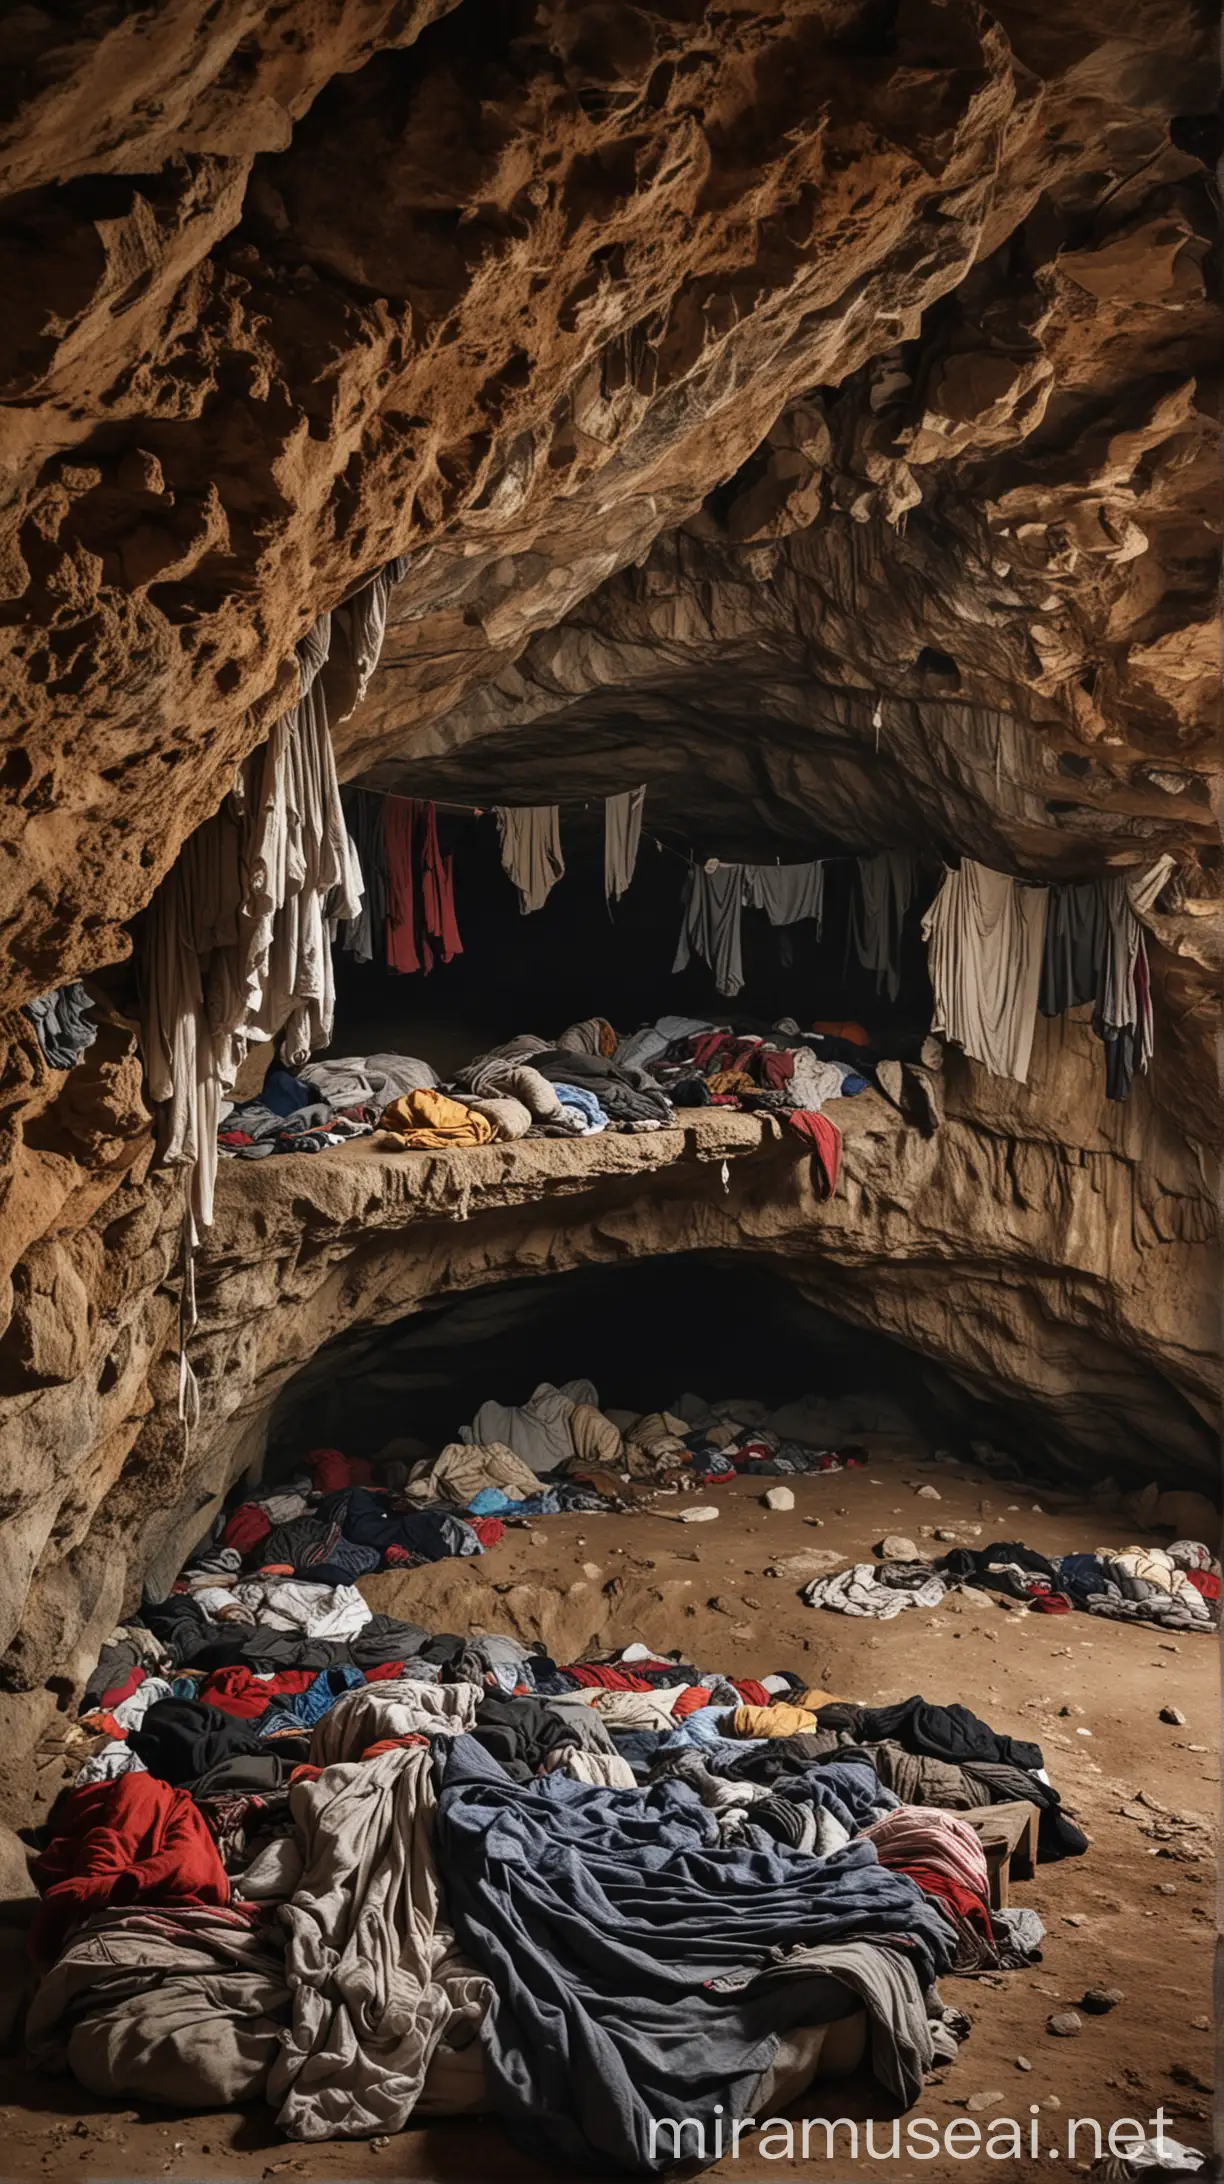 Youths Sleeping in Dusty Cave